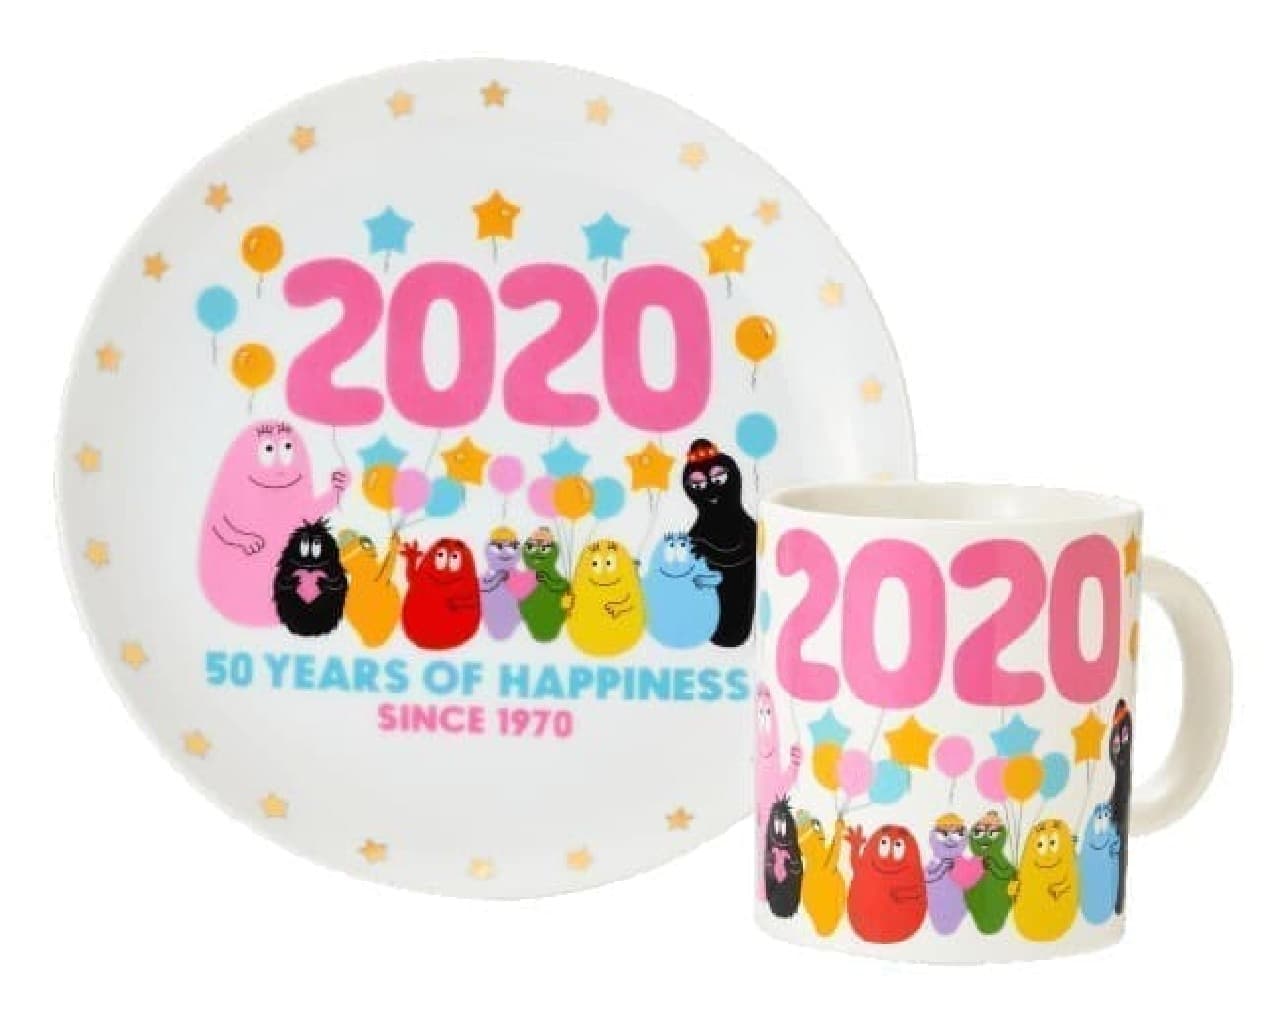 Let's liven up the New Year with Barbapapa goods! Commemorative plates and party boxes appear at PLAZA